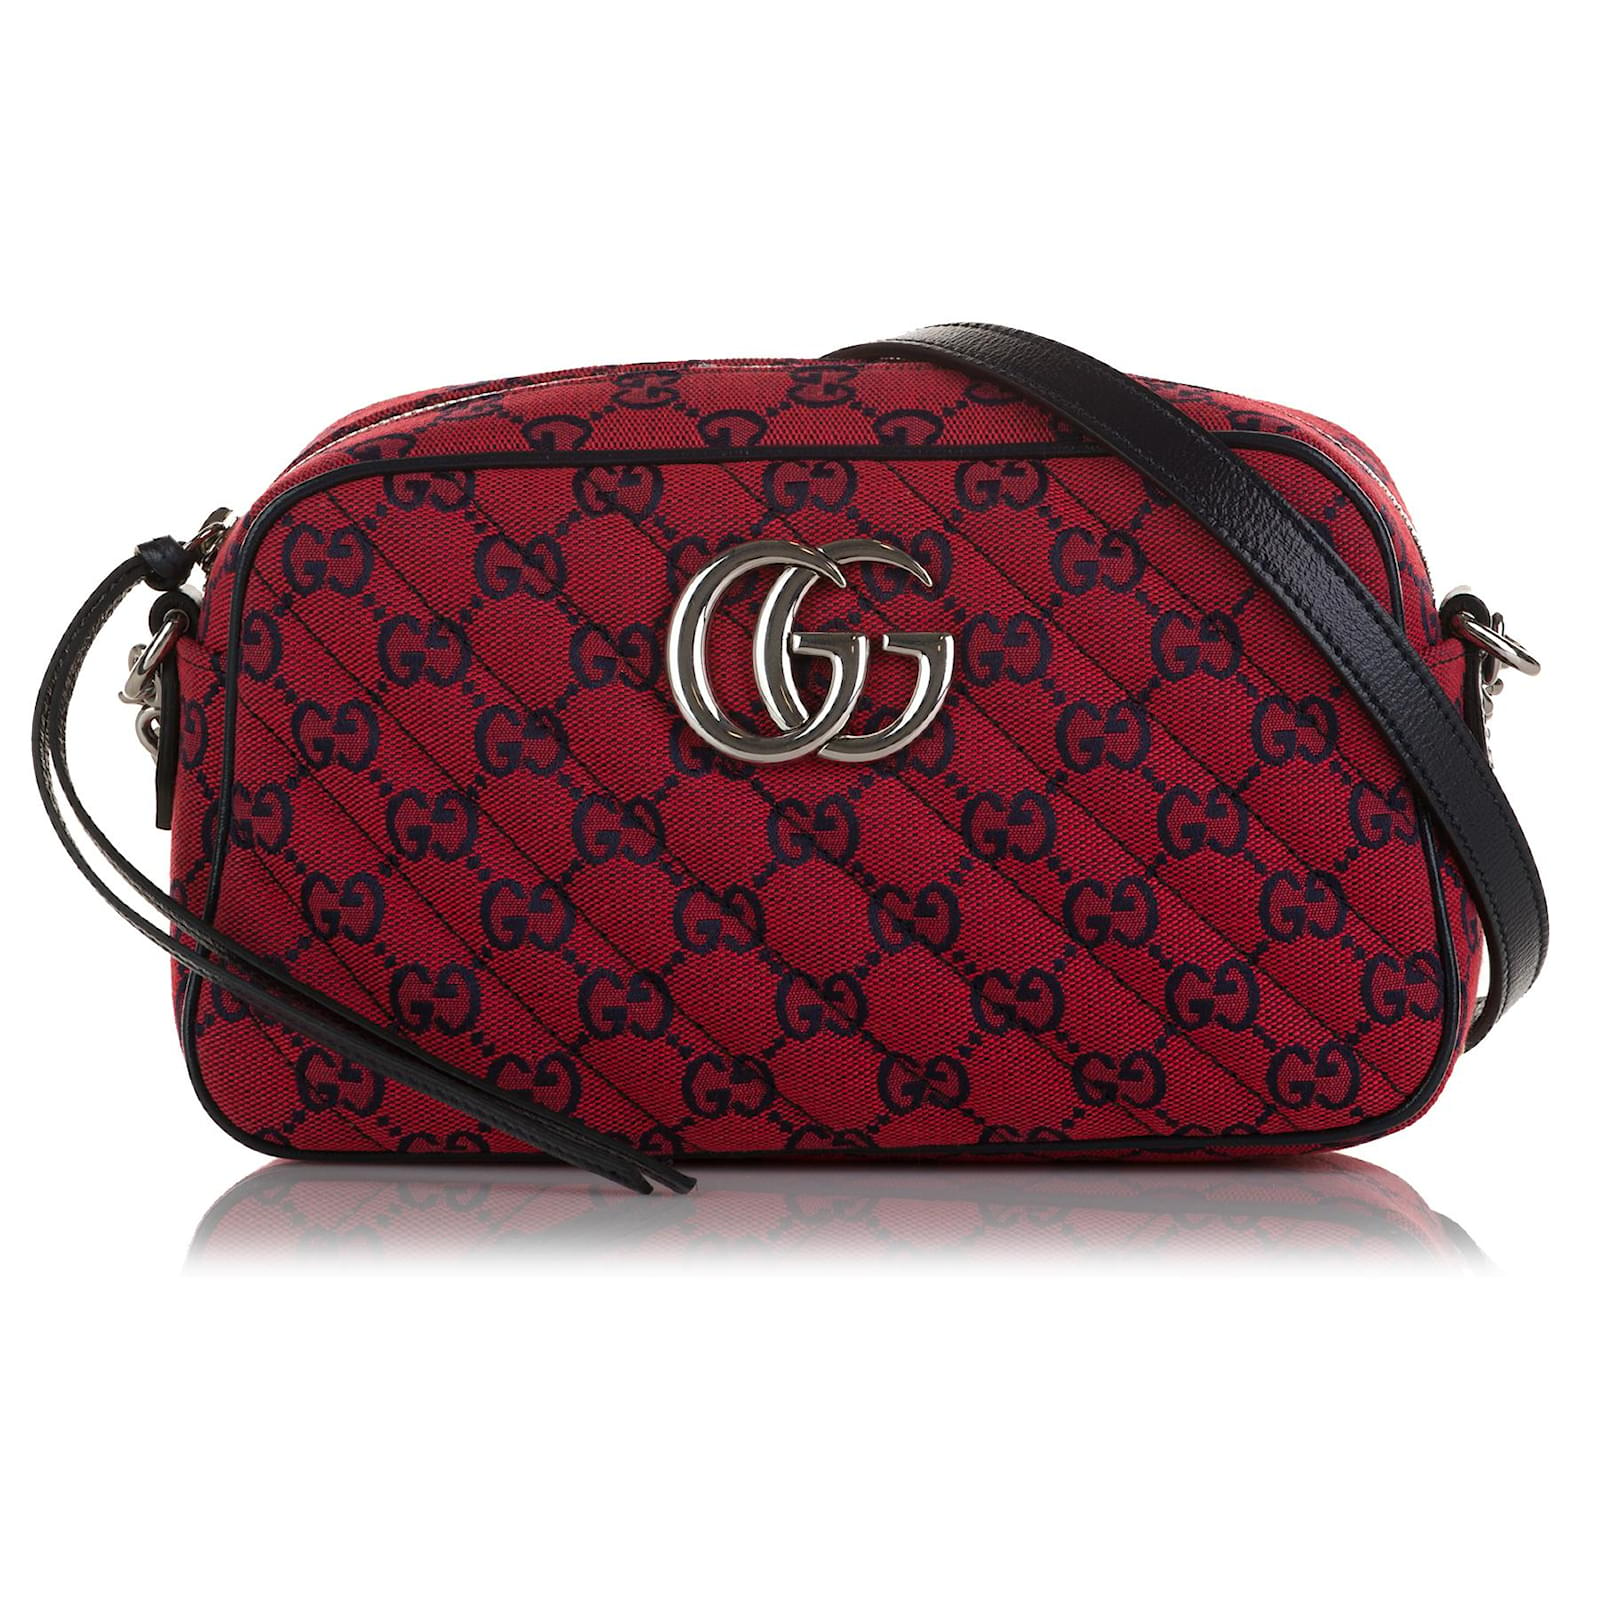 GUCCI Petit sac rouge GG Marmont